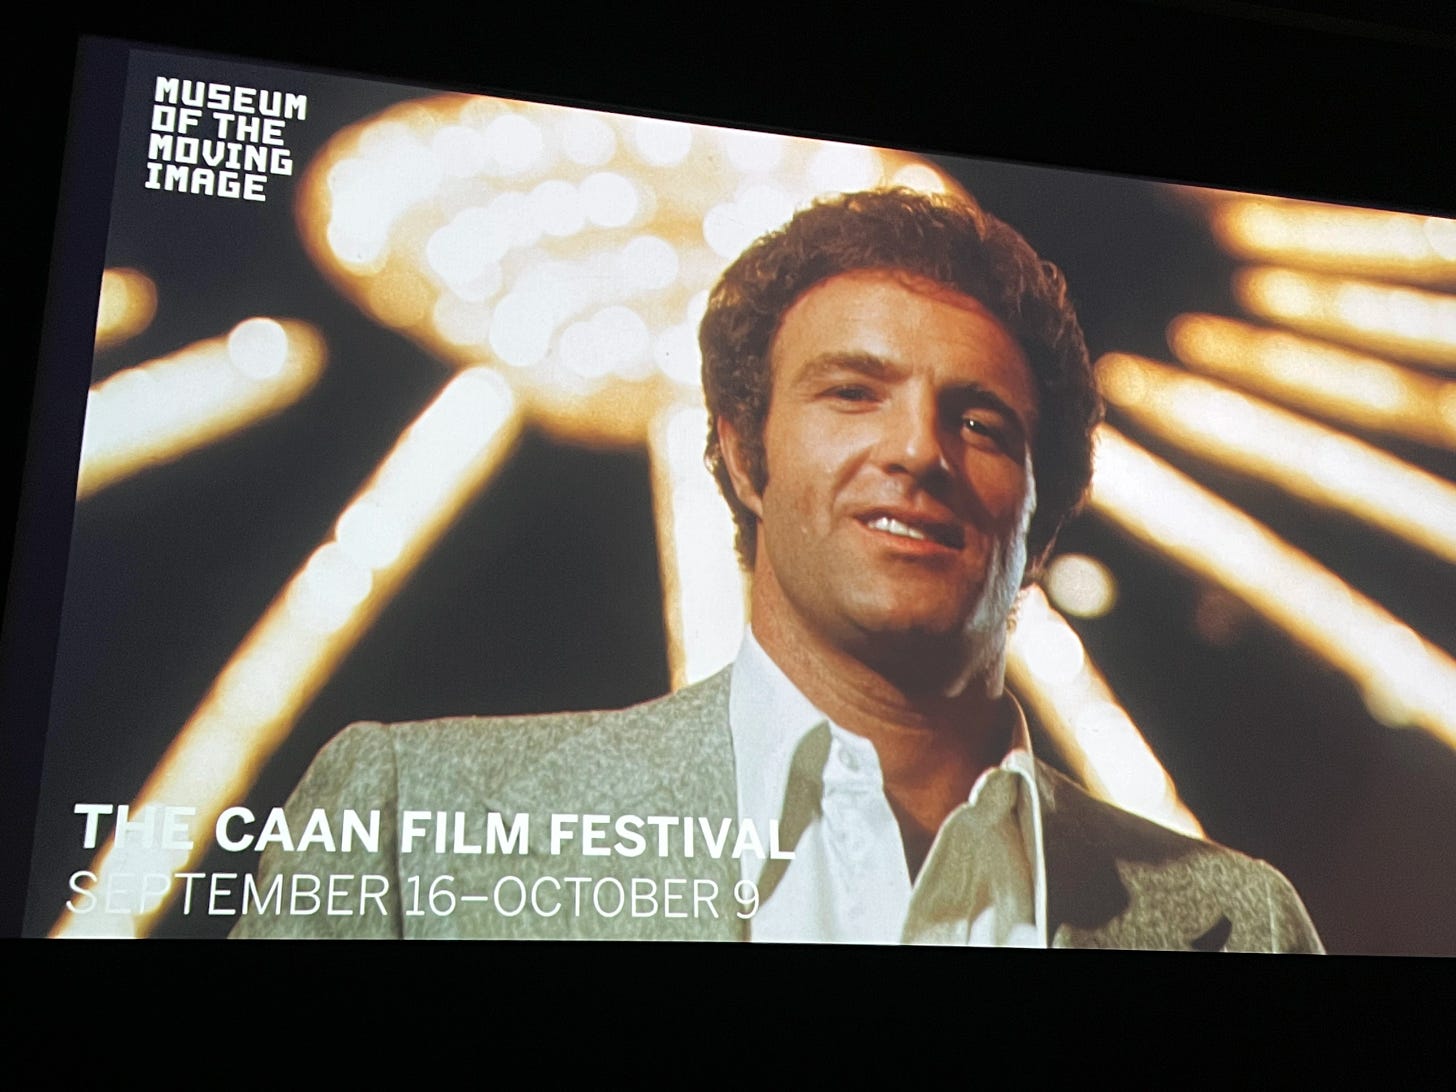 James Caan not Cannes, France